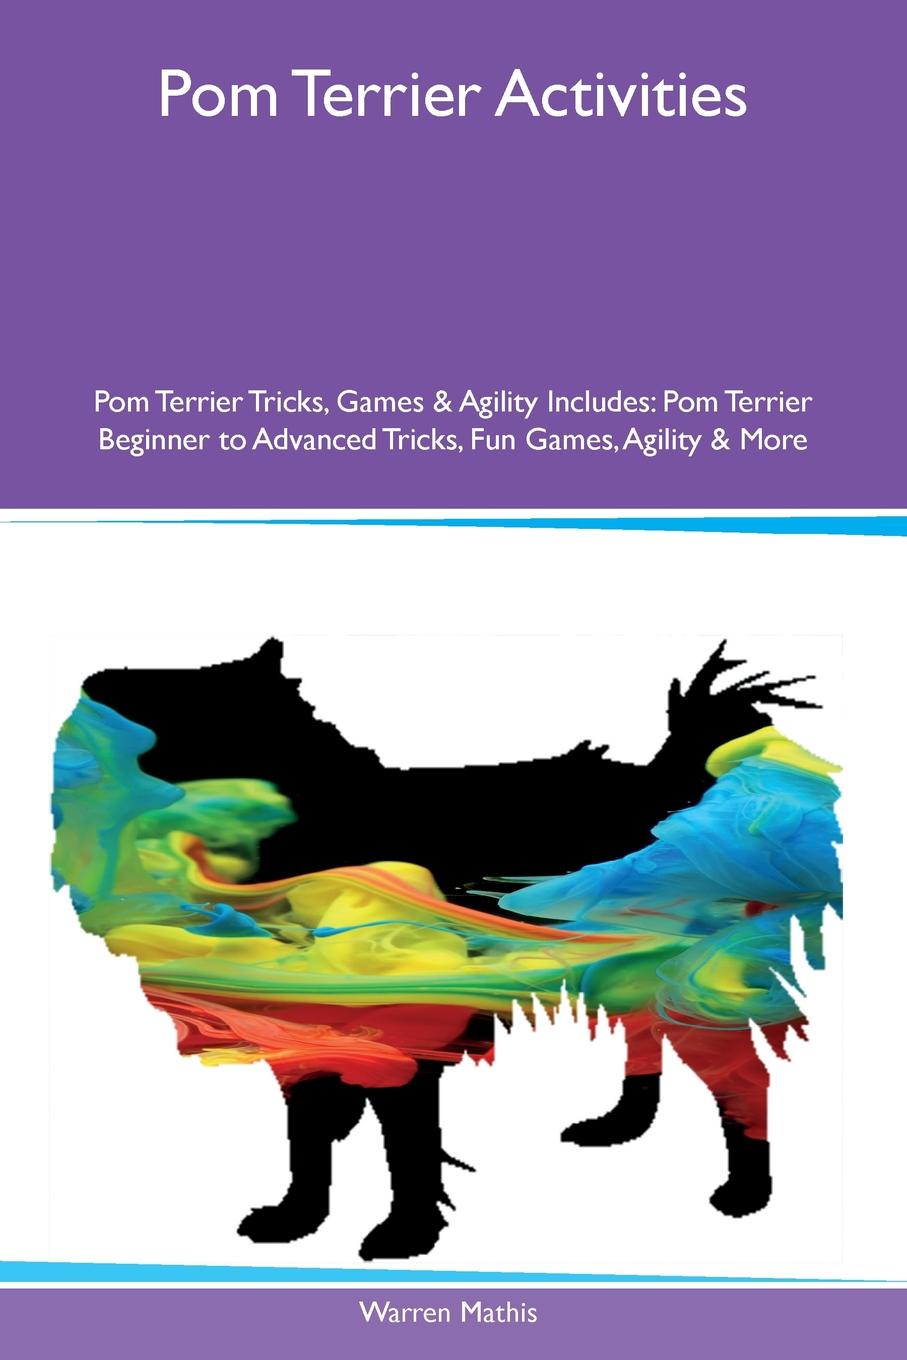 Pom Terrier Activities Pom Terrier Tricks, Games & Agility Includes. Pom Terrier Beginner to Advanced Tricks, Fun Games, Agility & More